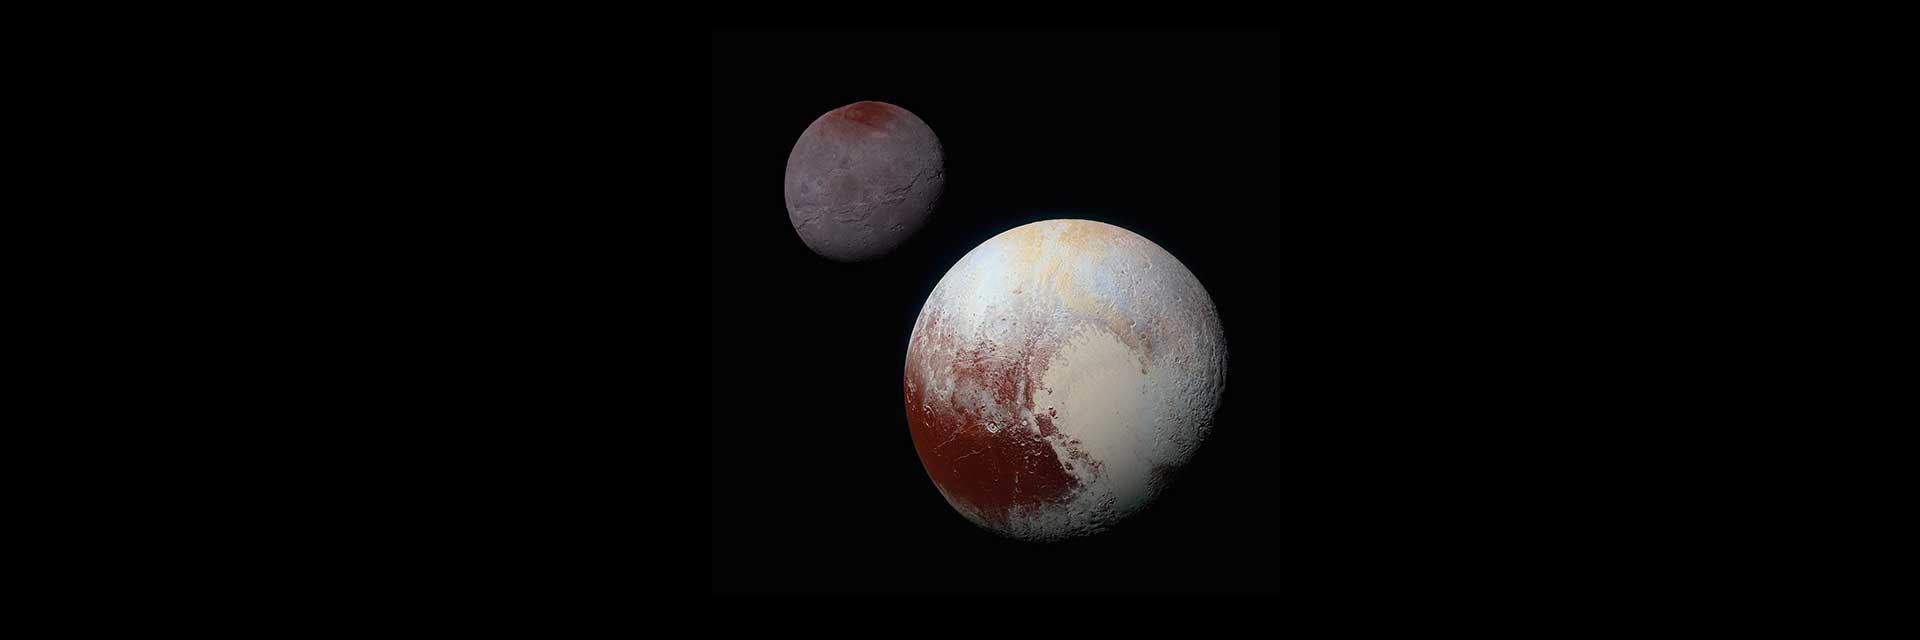 A composite image with Pluto's moon, Charon behind Pluto. Both worlds appear reddish with tan features in this enhanced color image.